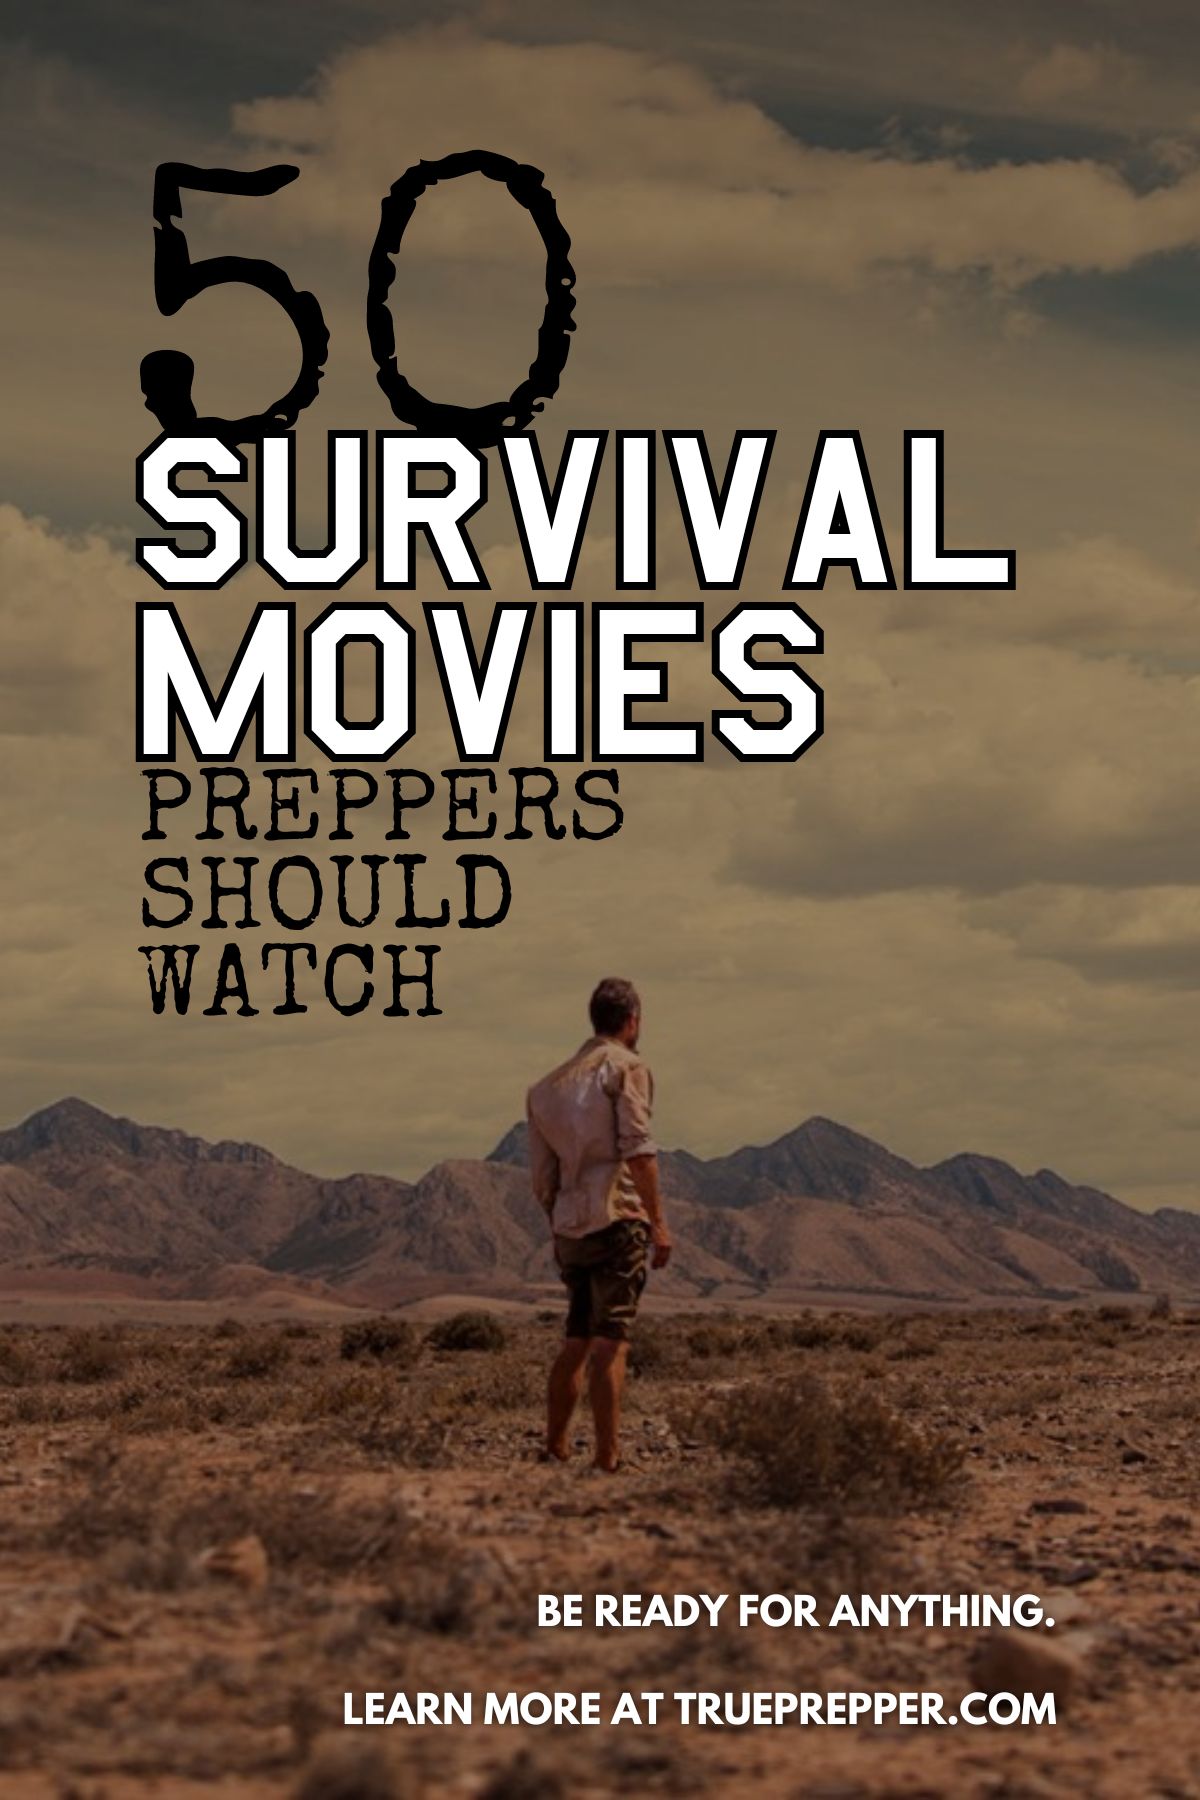 Survival Movies: 10 of the Best Flicks About Struggling to Stay Alive